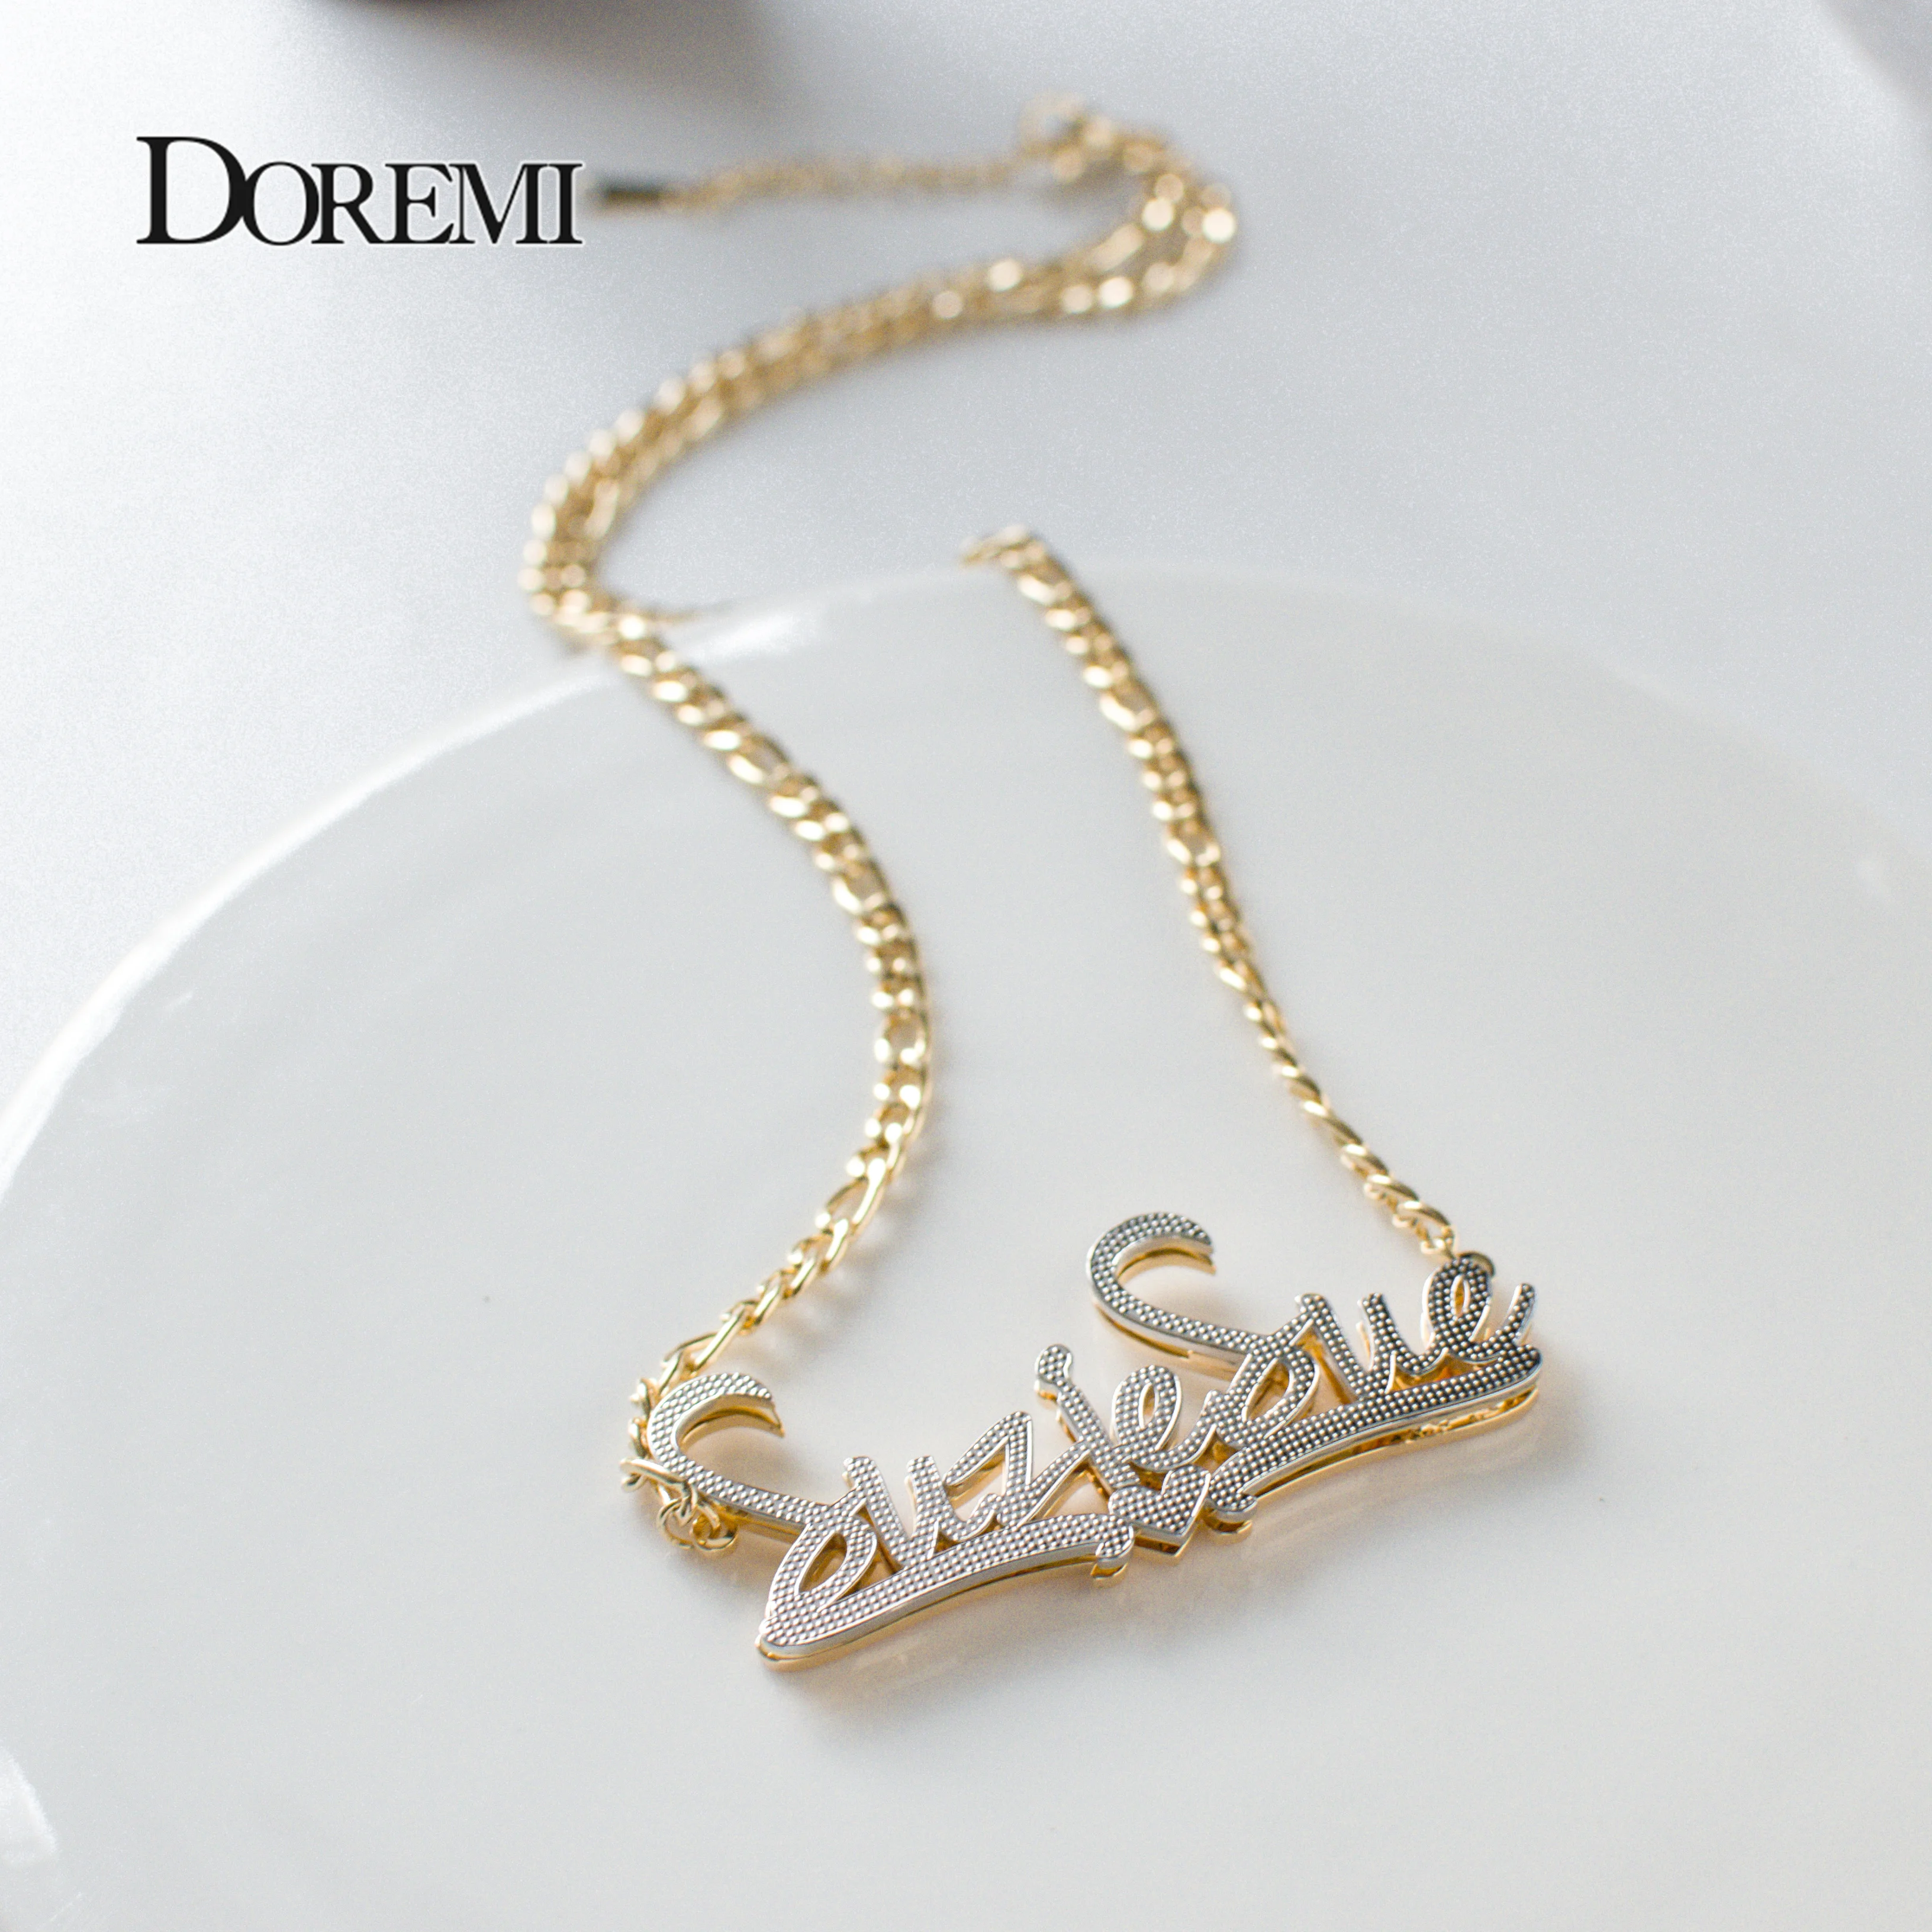 DOREMI 2 Toned 304 Stainless Name Necklace Heart Nameplate Personalized Pendant Double Layer Custom Jewelry Valentine's Day Gift valentine s day heart shaped earrings epoxy mold diy angel wings love jewelry necklace pendant resin silicone mold